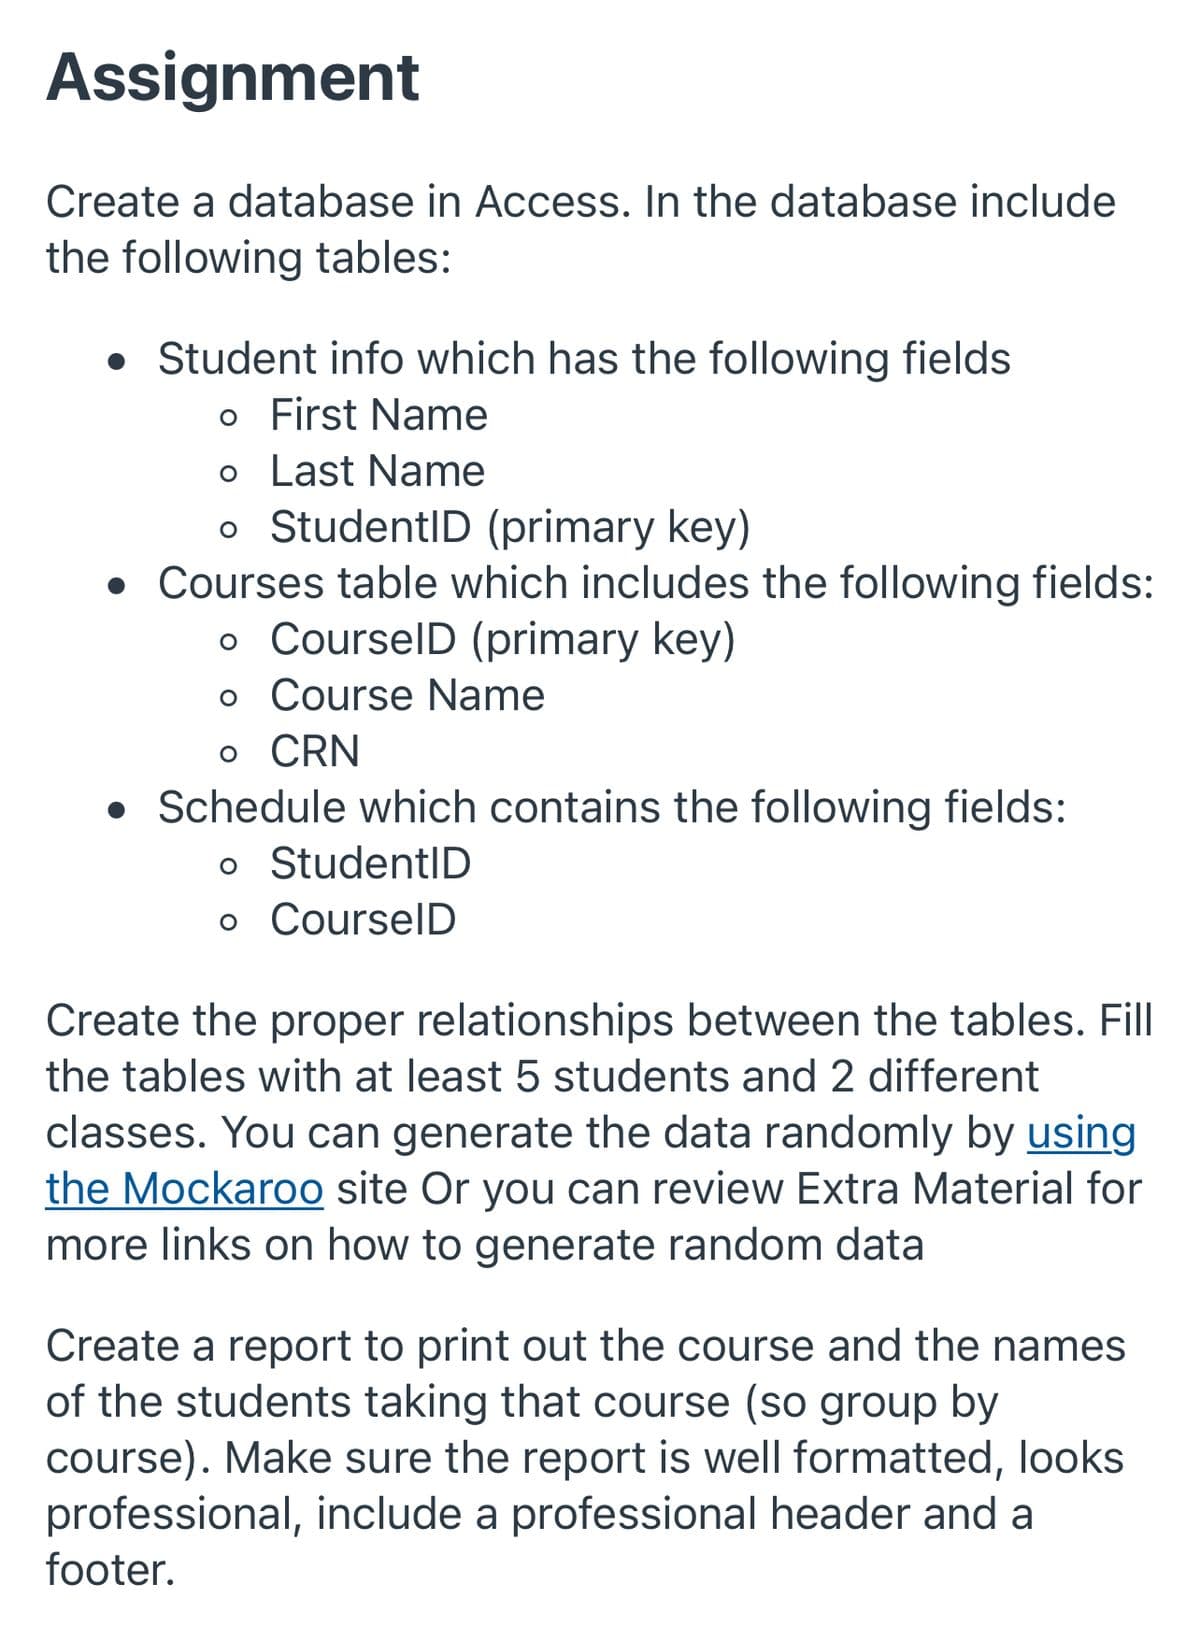 Assignment
Create a database in Access. In the database include
the following tables:
• Student info which has the following fields
o First Name
o Last Name
o StudentID (primary key)
• Courses table which includes the following fields:
o CourselD (primary key)
o Course Name
o CRN
• Schedule which contains the following fields:
o StudentID
o CourselD
Create the proper relationships between the tables. Fill
the tables with at least 5 students and 2 different
classes. You can generate the data randomly by using
the Mockaroo site Or you can review Extra Material for
more links on how to generate random data
Create a report to print out the course and the names
of the students taking that course (so group by
course). Make sure the report is well formatted, looks
professional, include a professional header and a
footer.
